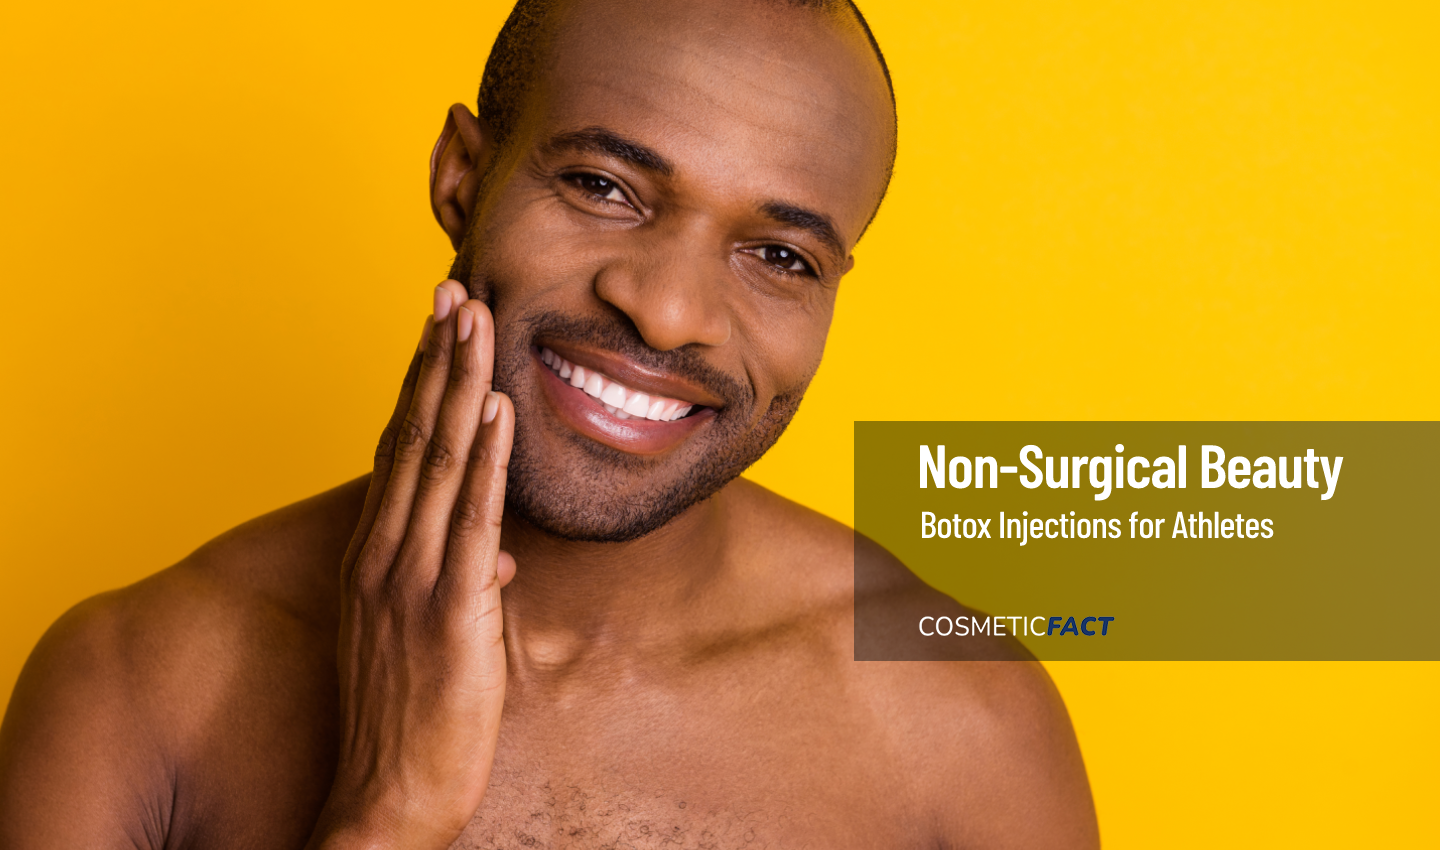 A male athlete getting Botox injections on his face with a smile on his face.